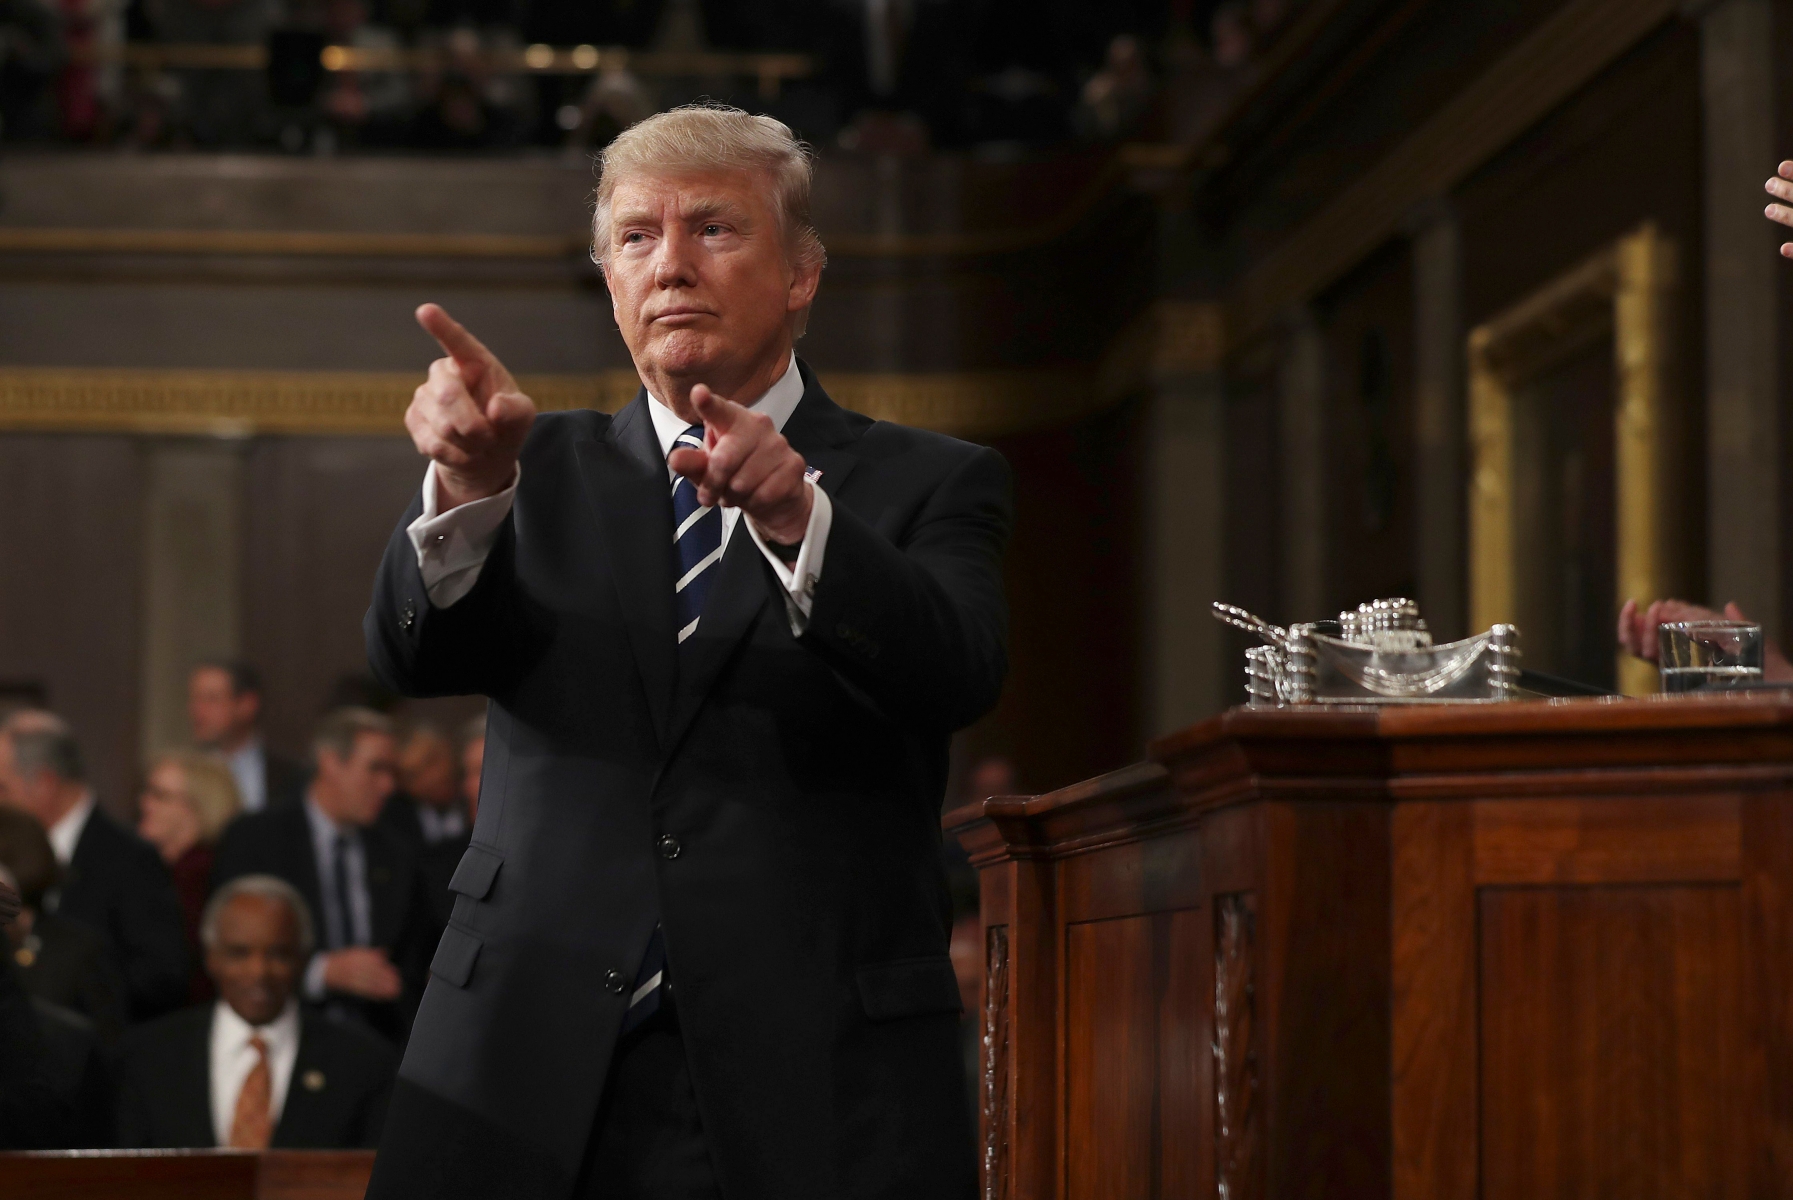 epa05821918 US President Donald J. Trump reacts after delivering his first address to a joint session of Congress from the floor of the House of Representatives in Washington, DC, USA, 28 February 2017. Traditionally the first address to a joint session of Congress by a newly-elected president is not referred to as a State of the Union.  EPA/JIM LO SCALZO / POOL USA TRUMP PRESIDENTIAL ADDRESS